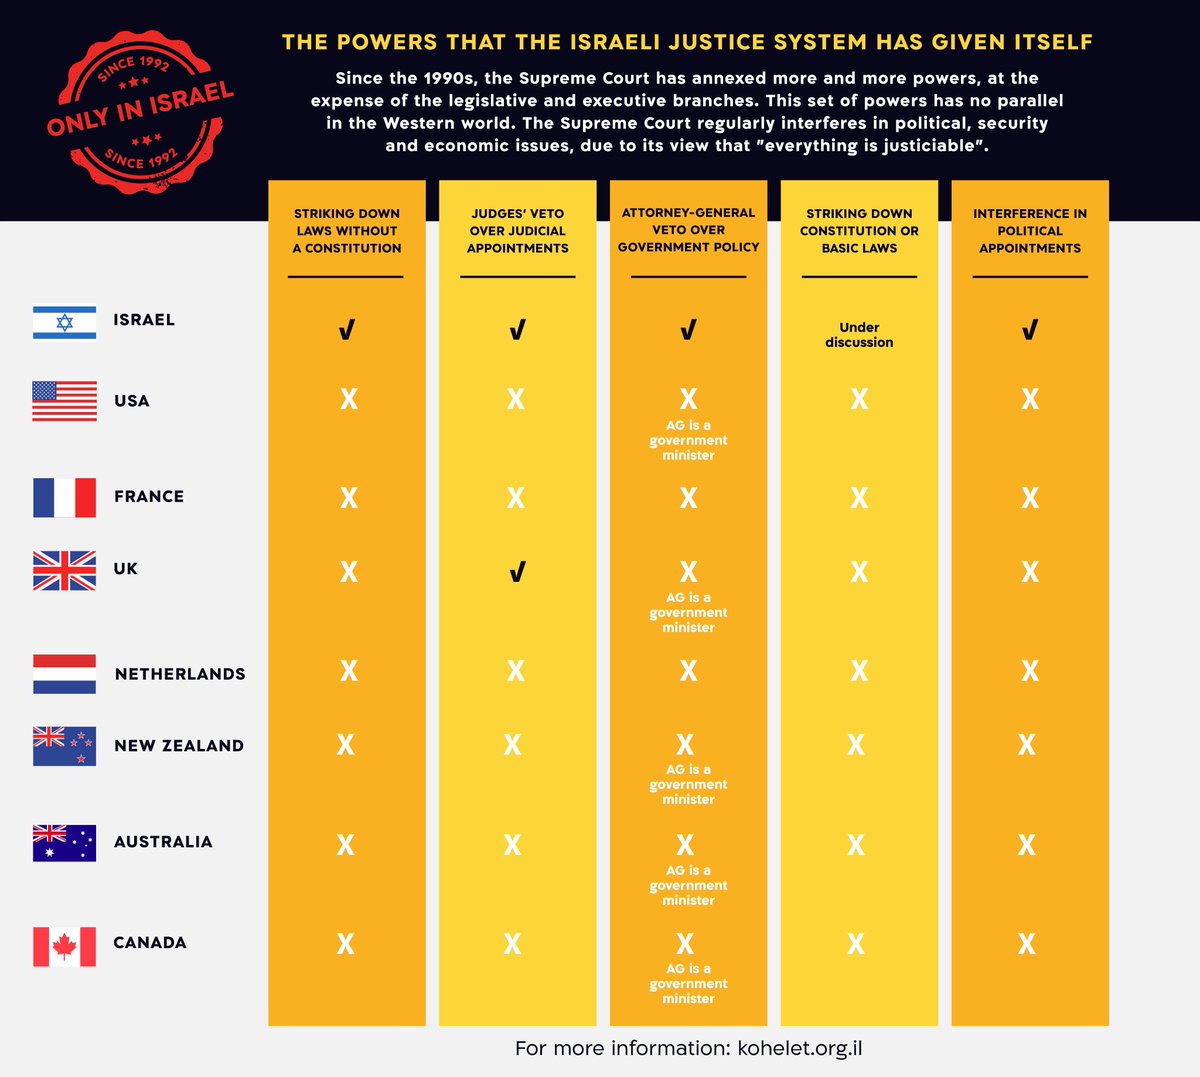 Excess Powers of Israel's Judiciary